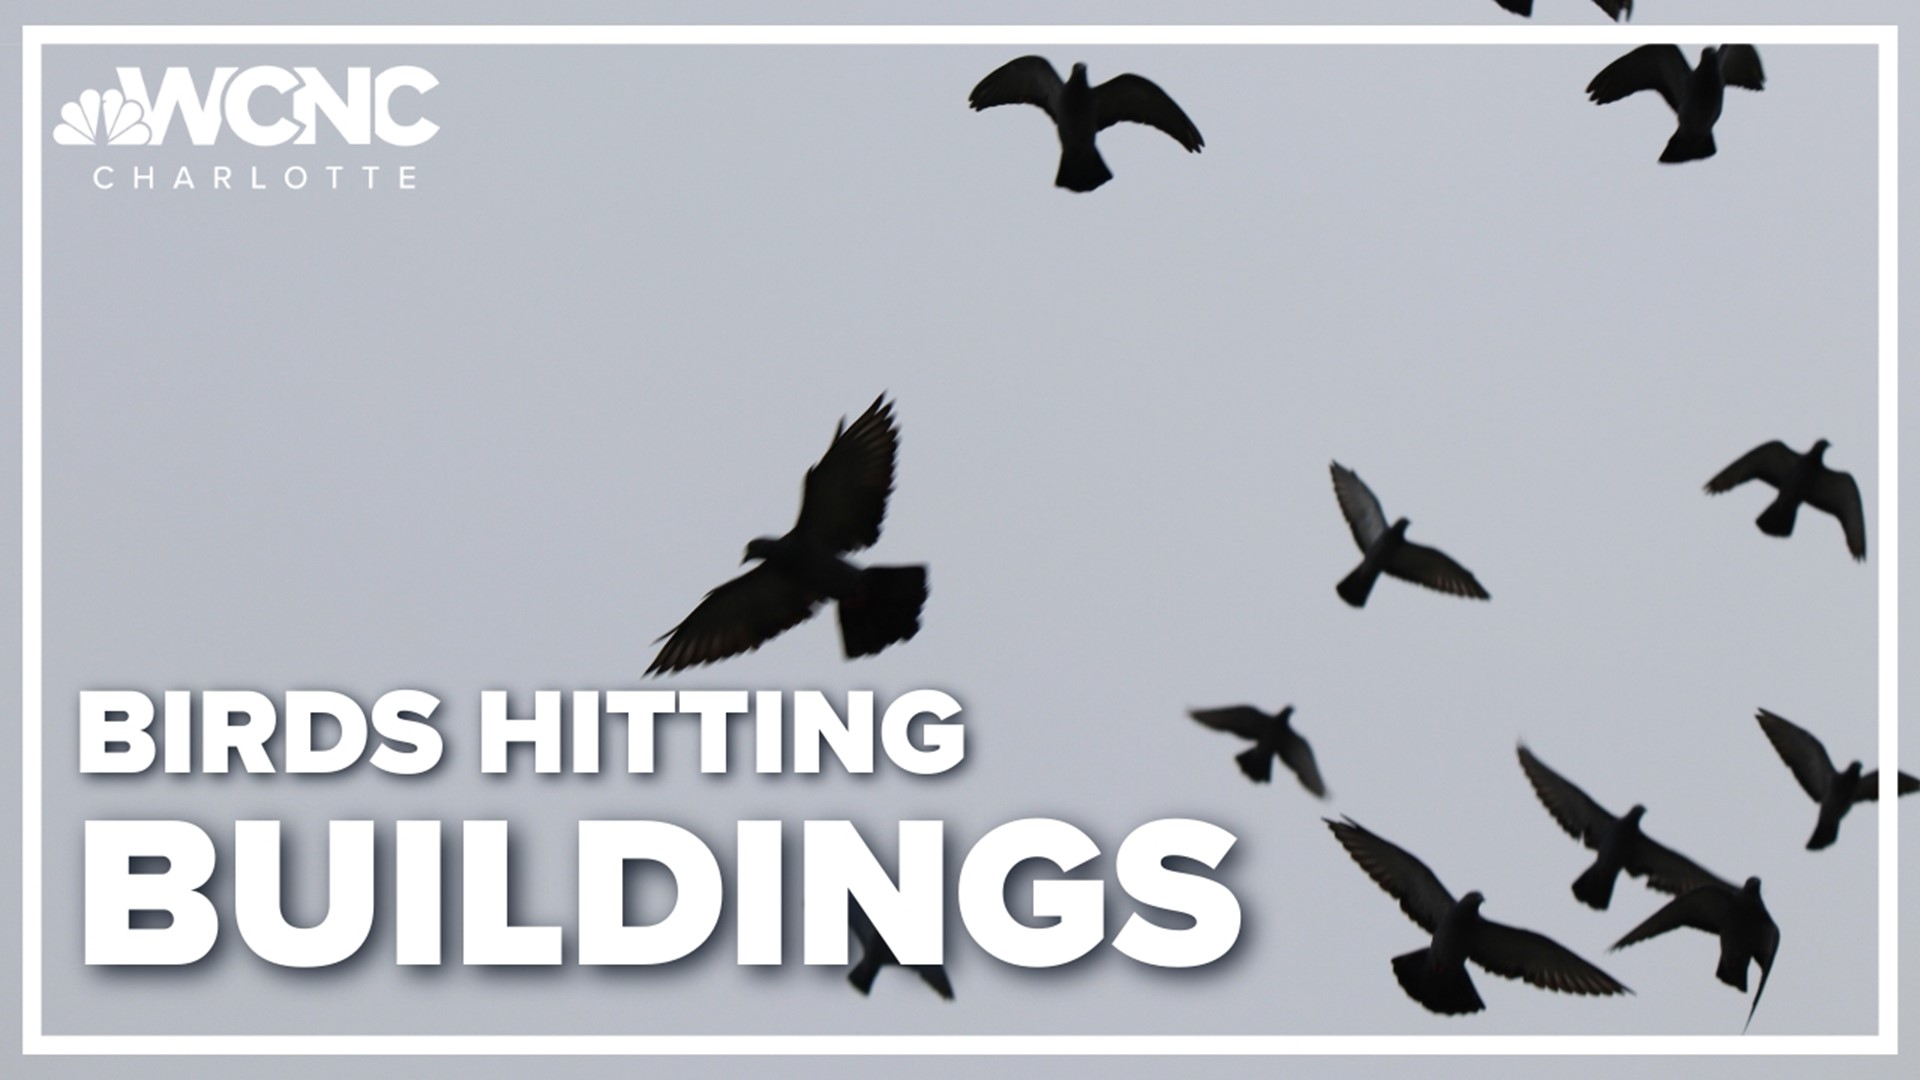 Birds can mistaken the reflection of sky and trees in windows. Flying into the windows can seriously harm or kill the animals.